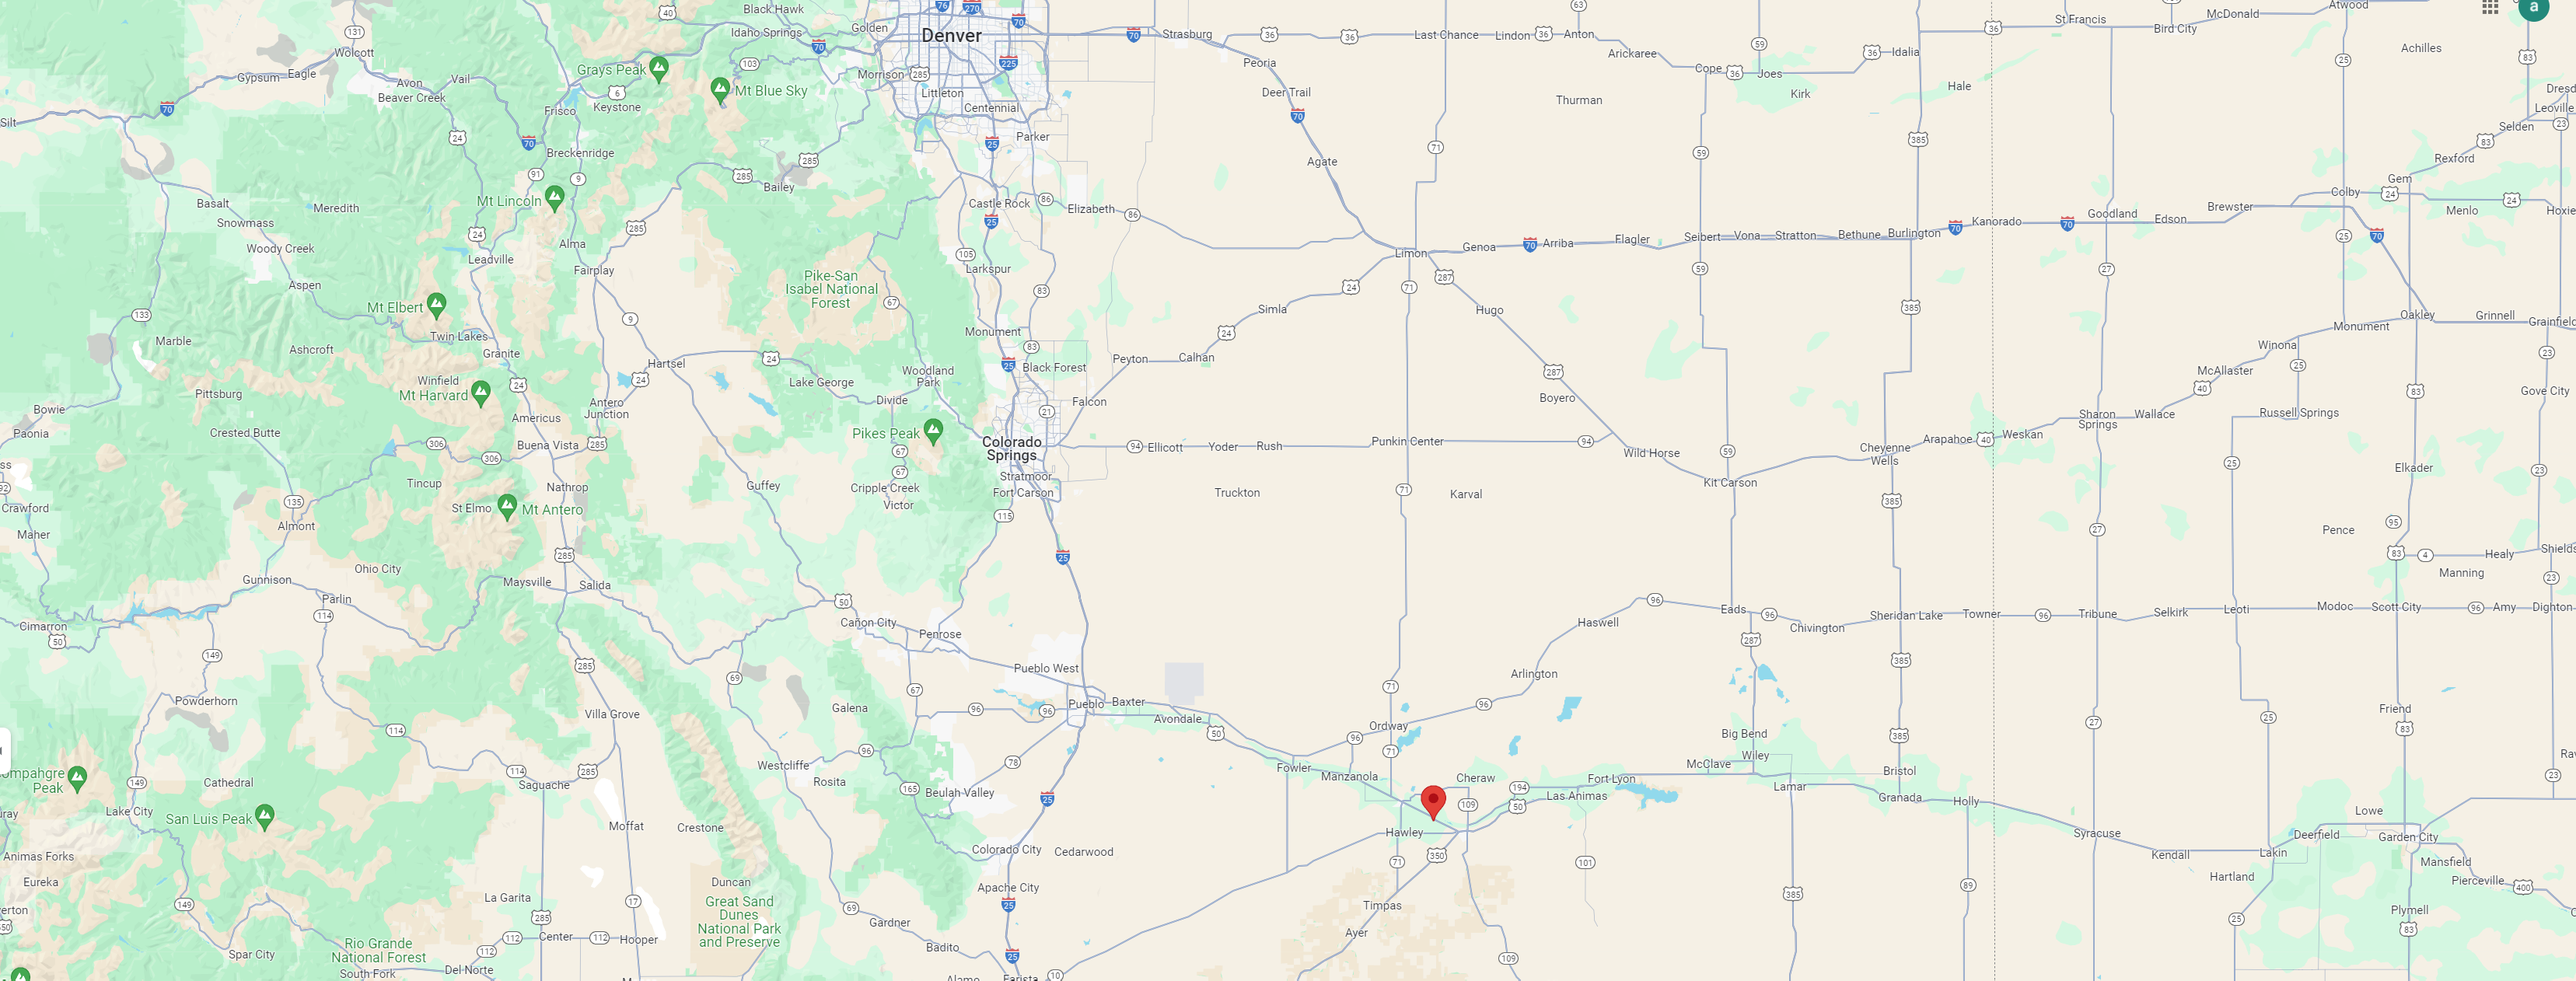 Coinable's location on a map, marked by a pin in Colorado